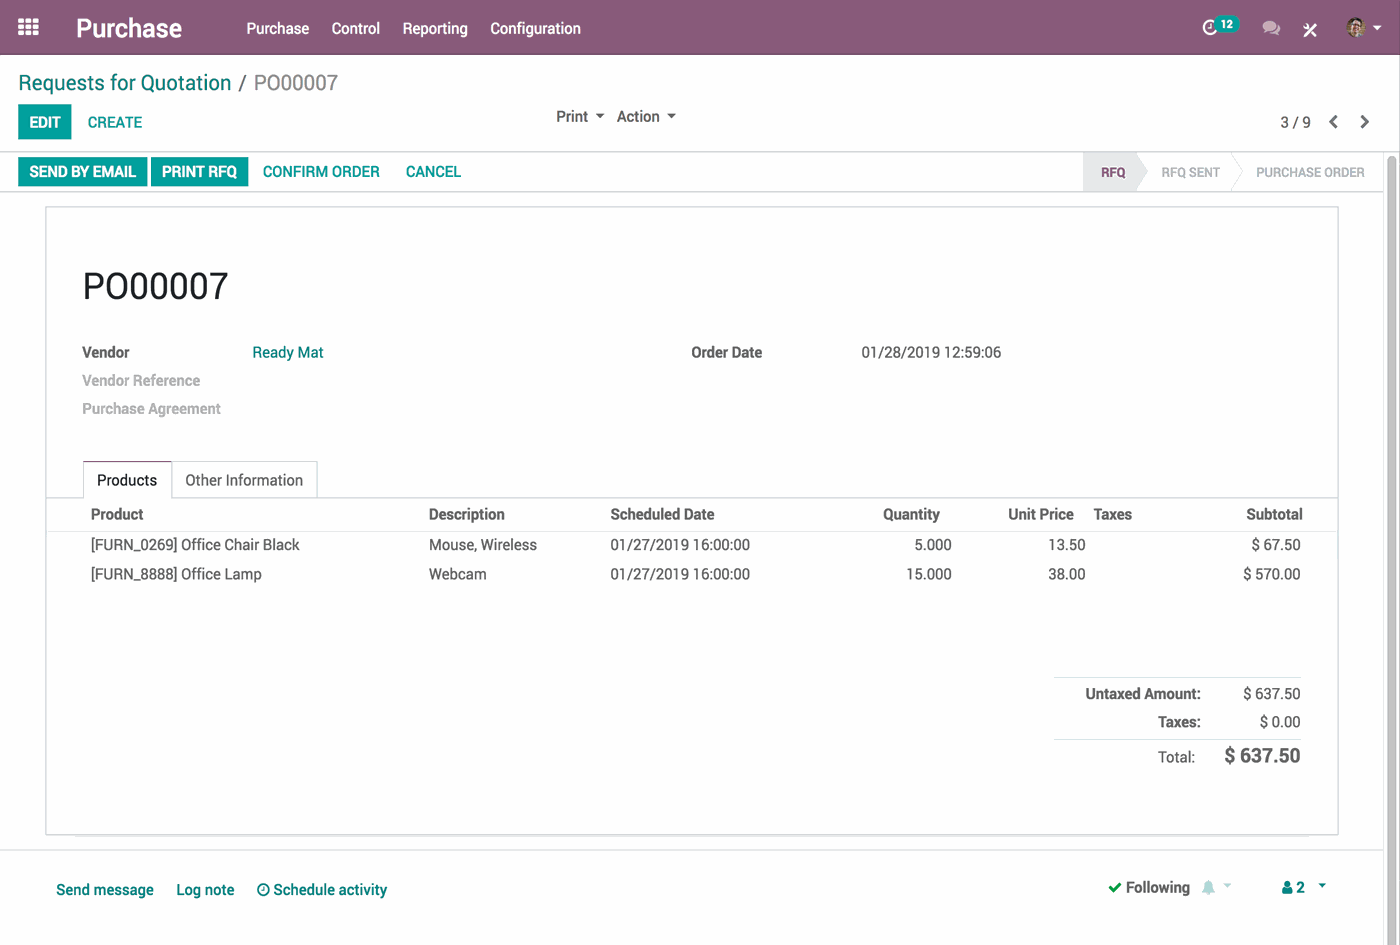 Odoo Purchase interface for a request for quotation